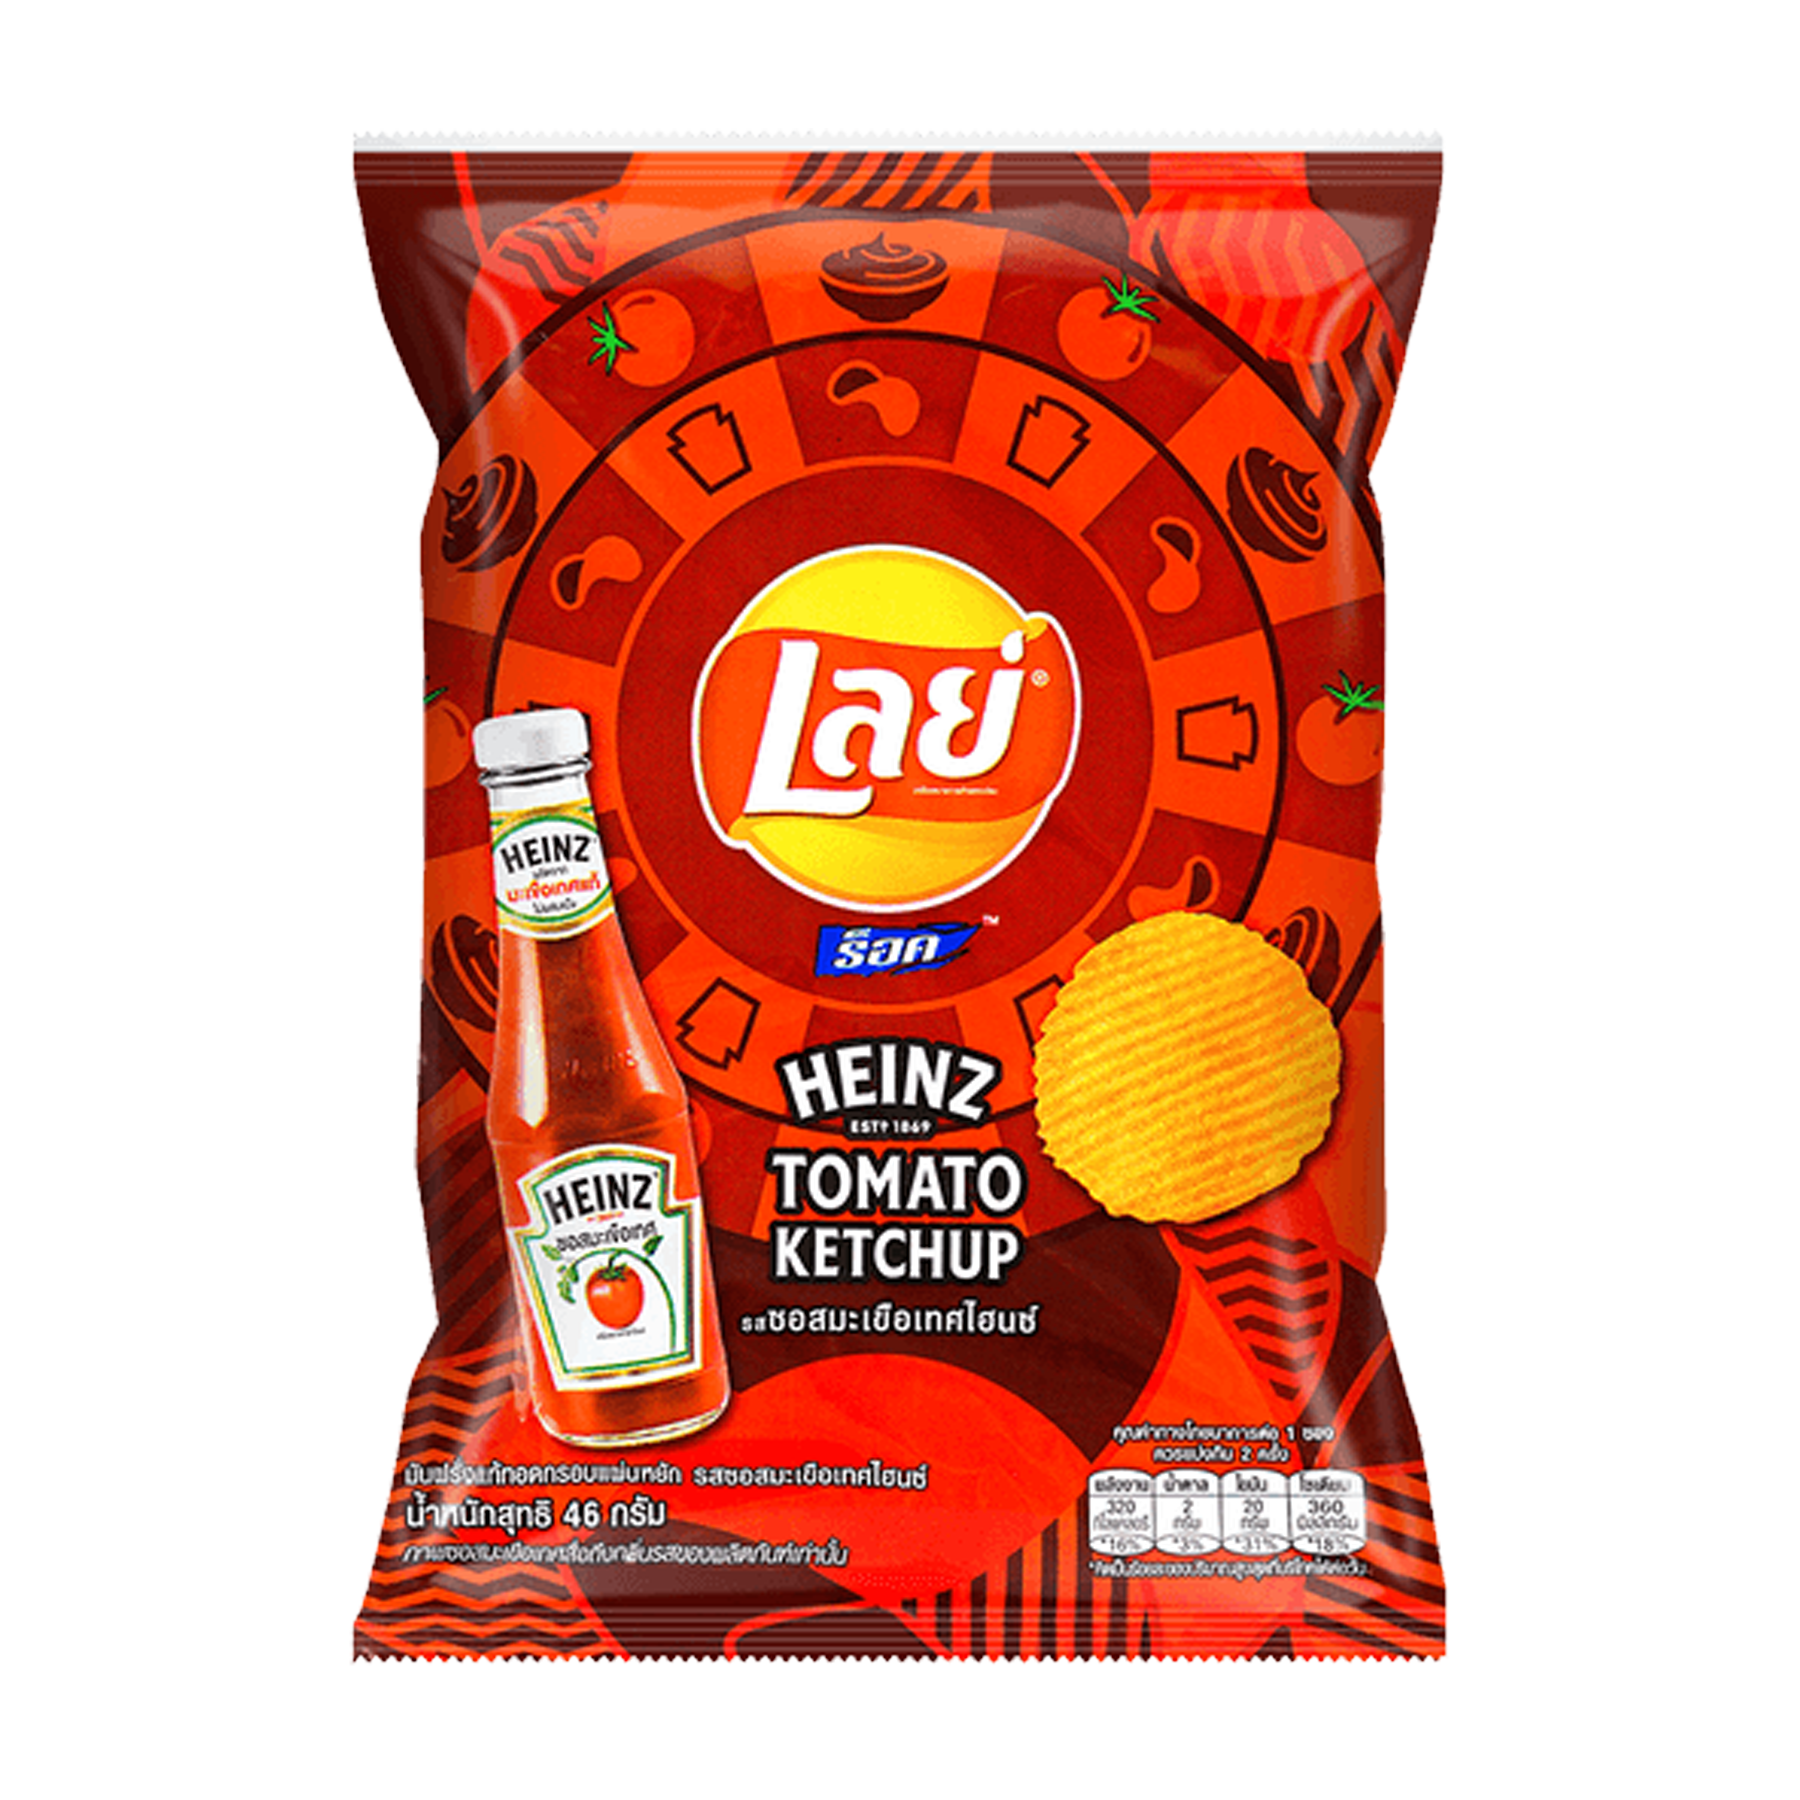 Lays Heinz Tomato Ketchup Flavored Chips